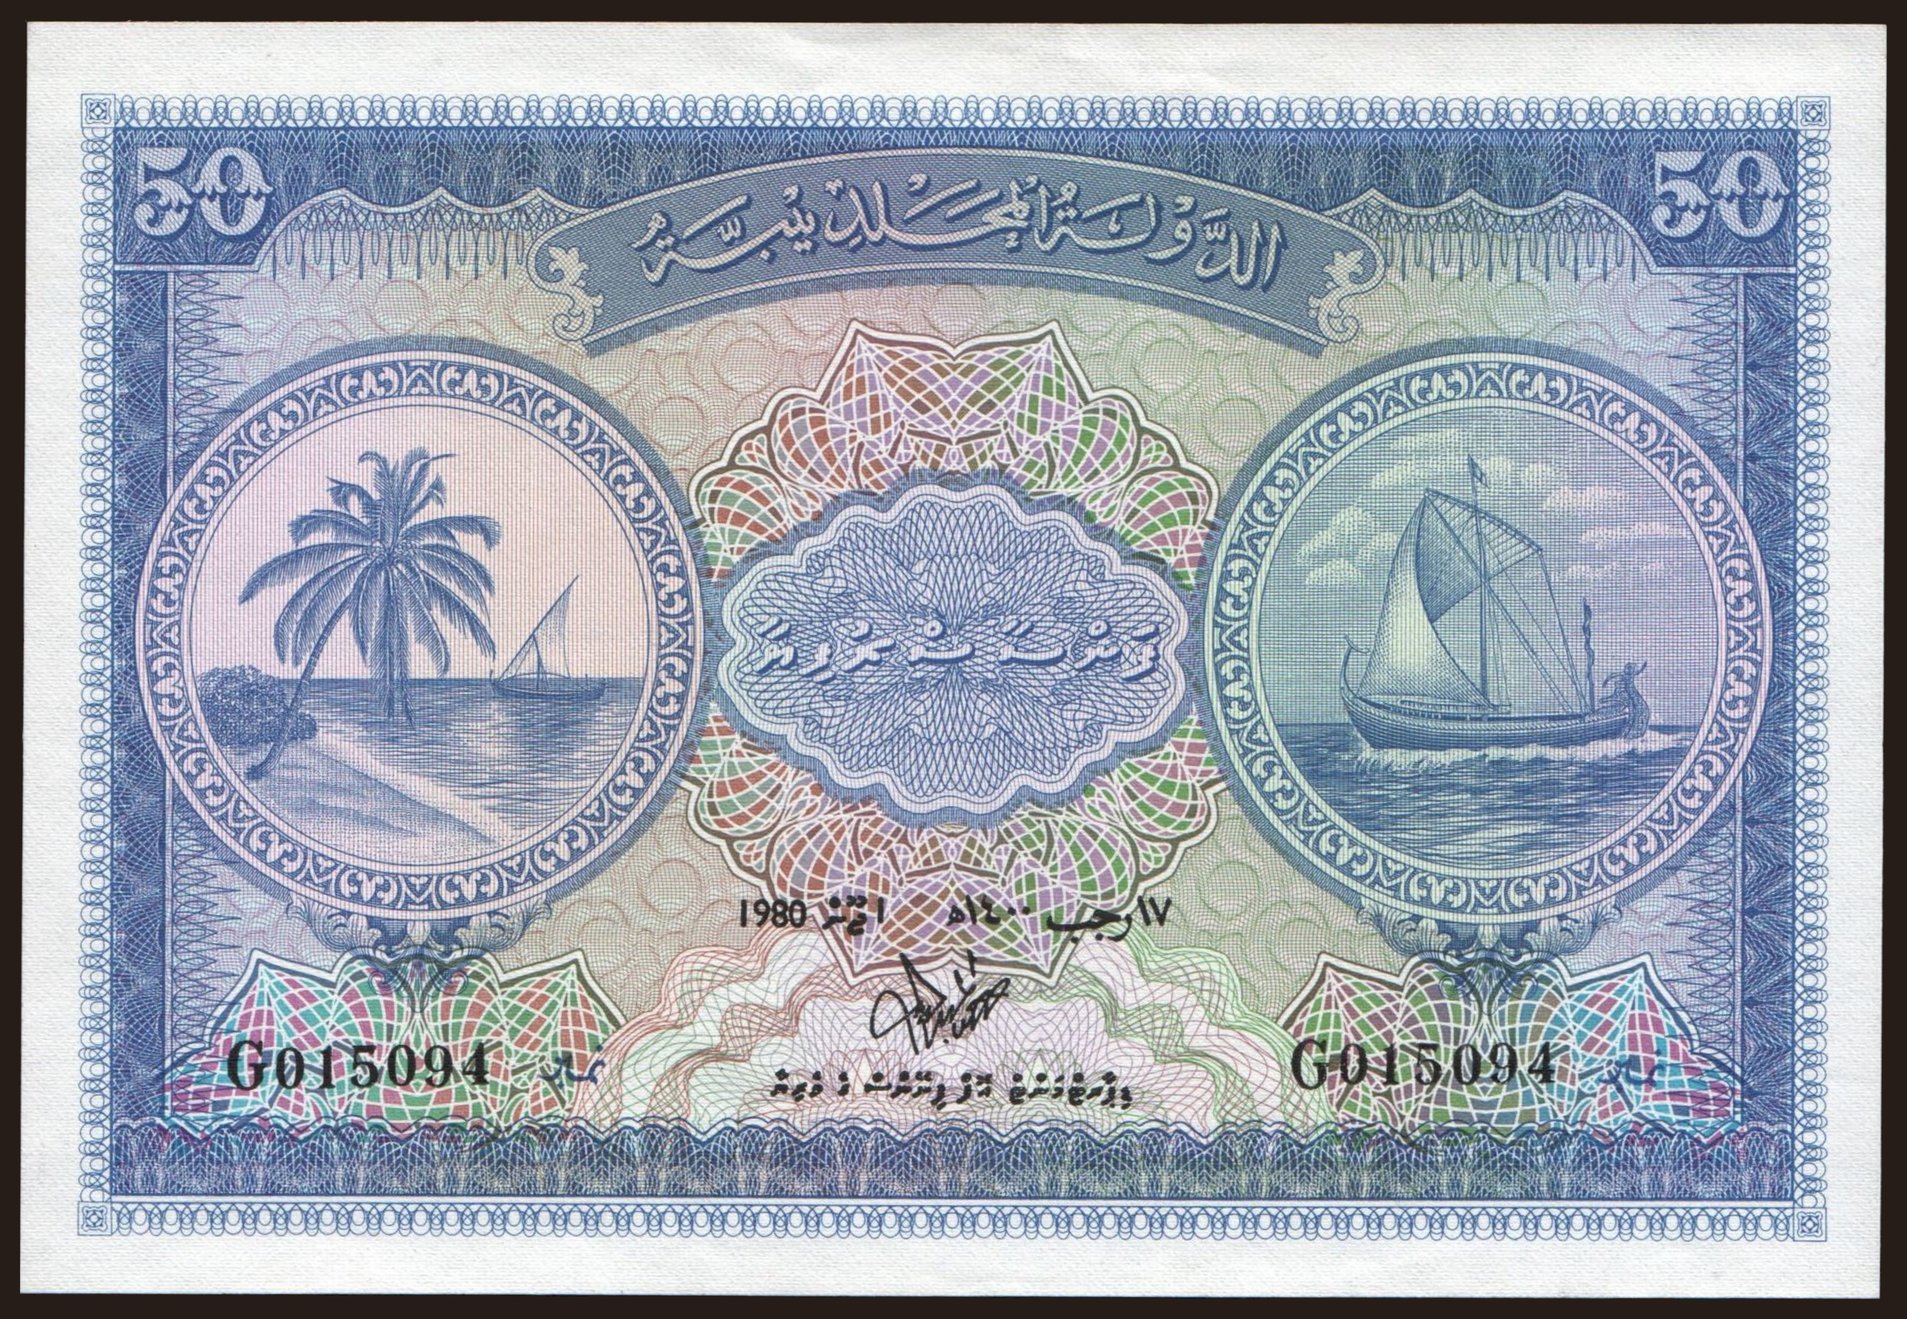 50 rupees, 1980